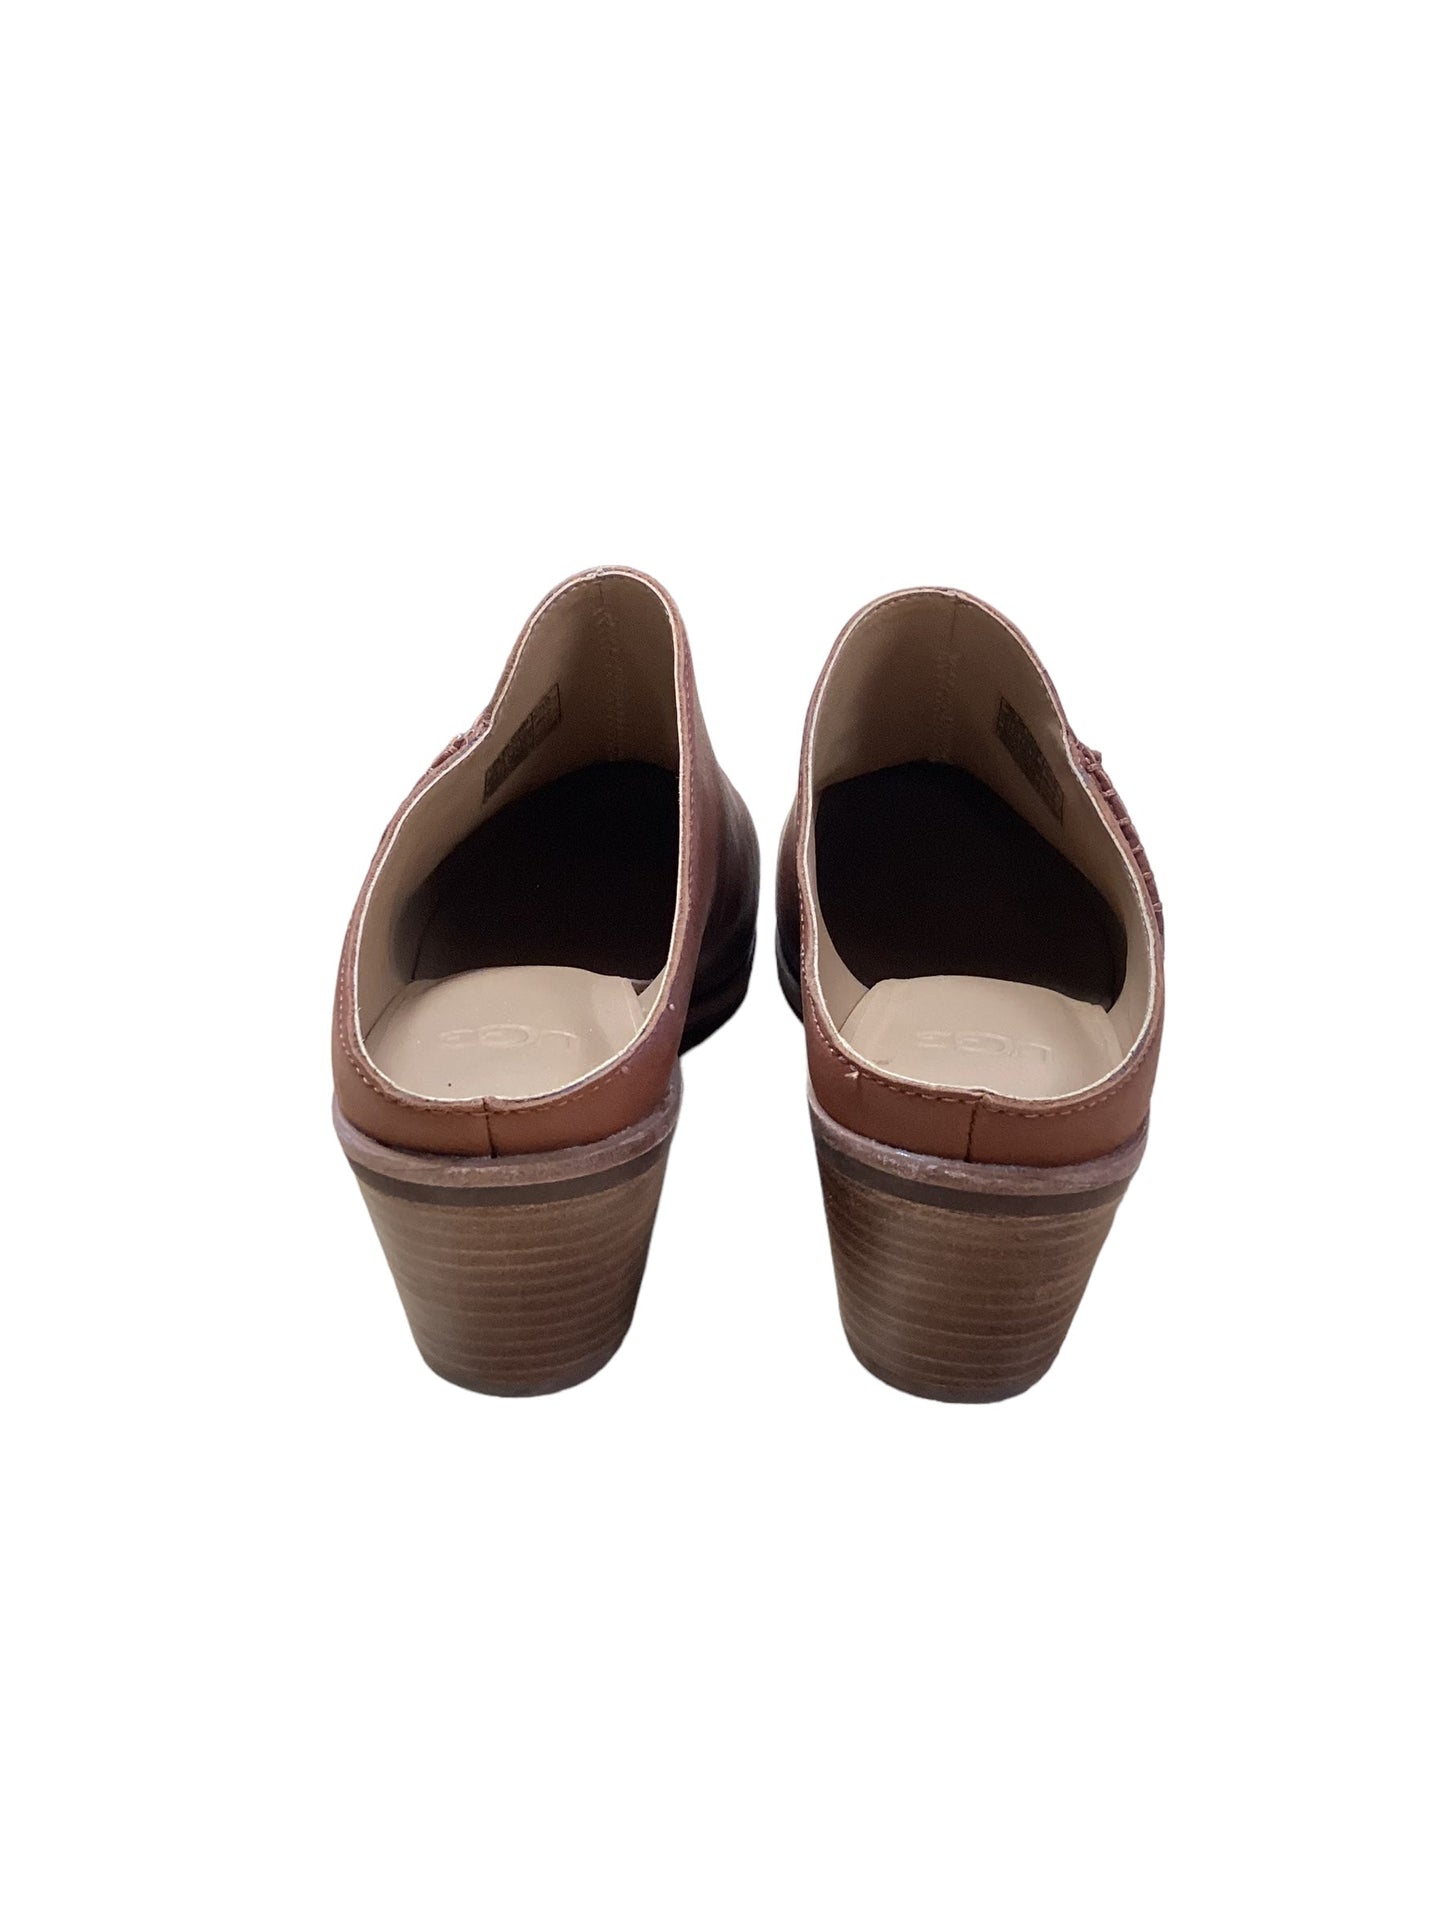 Shoes Flats Mule & Slide By Ugg  Size: 8.5